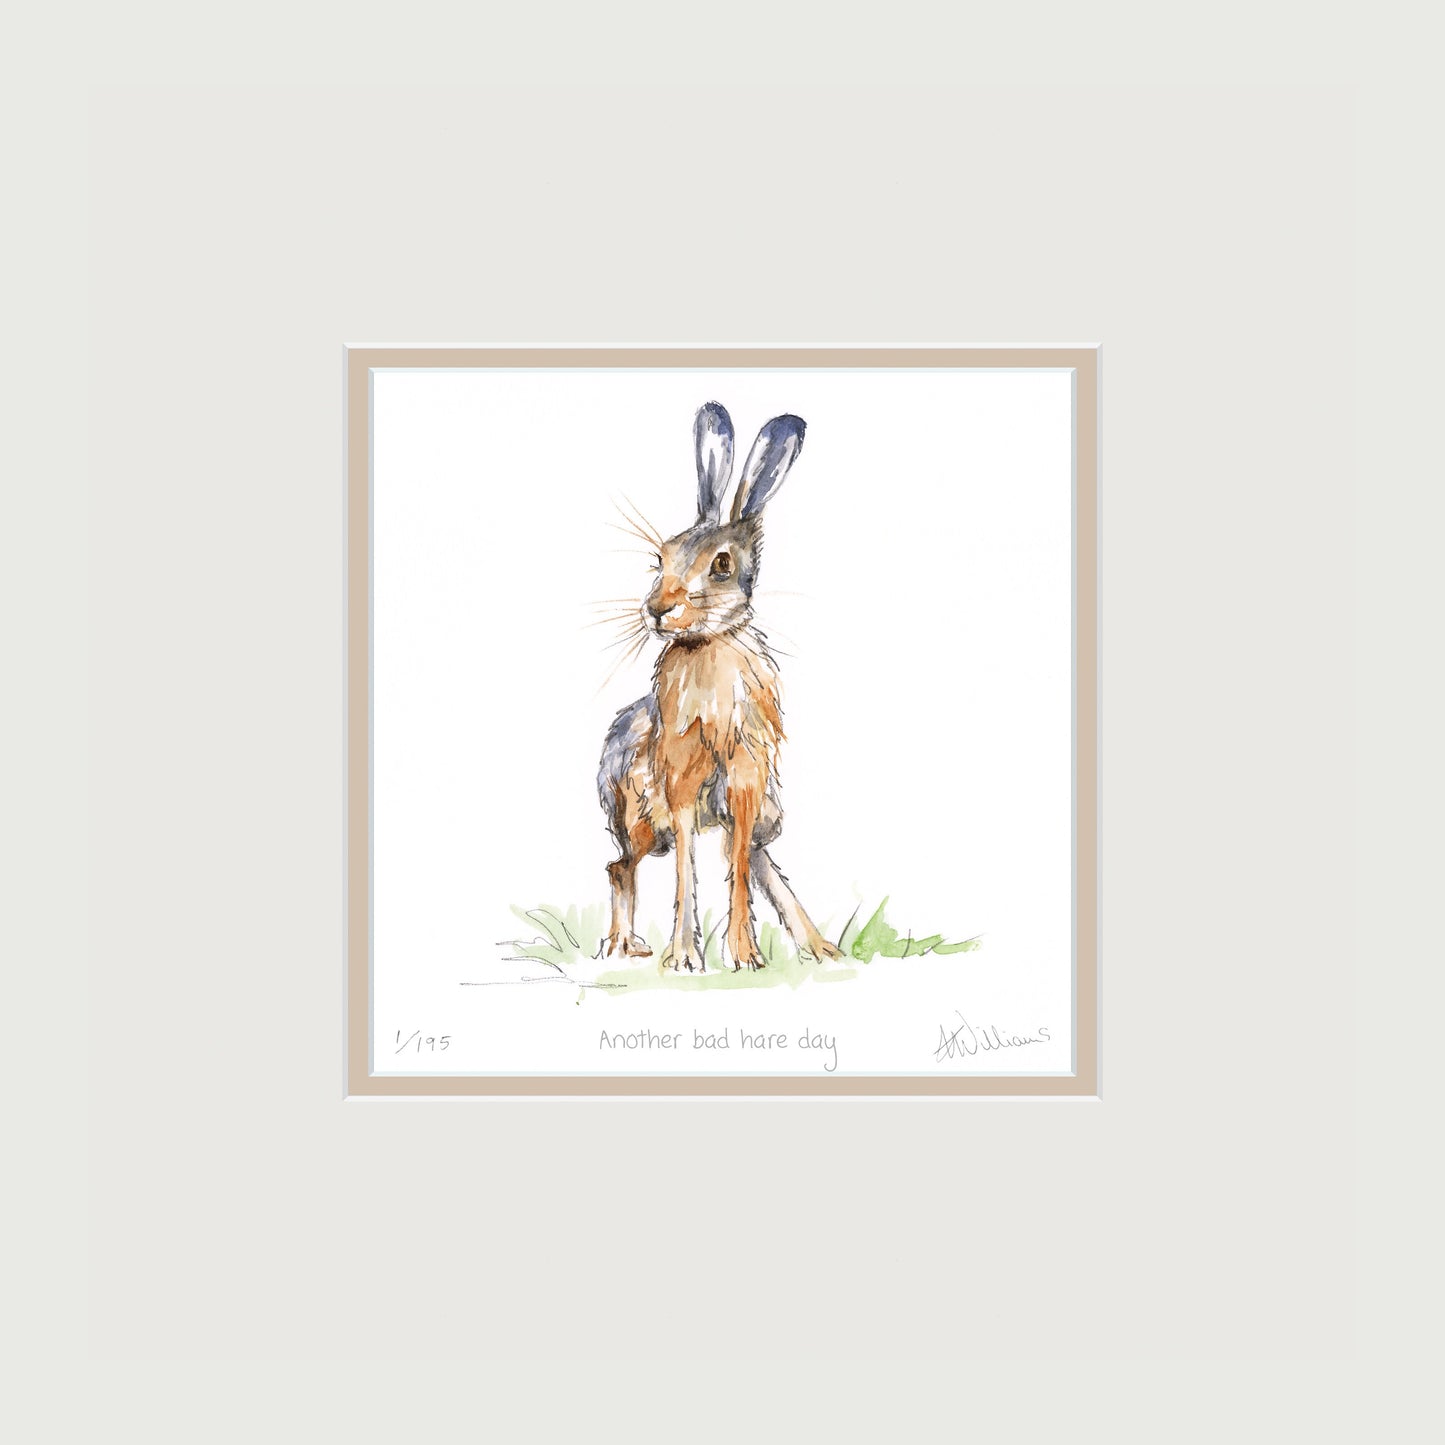 'Another Bad Hare Day' - limited edition